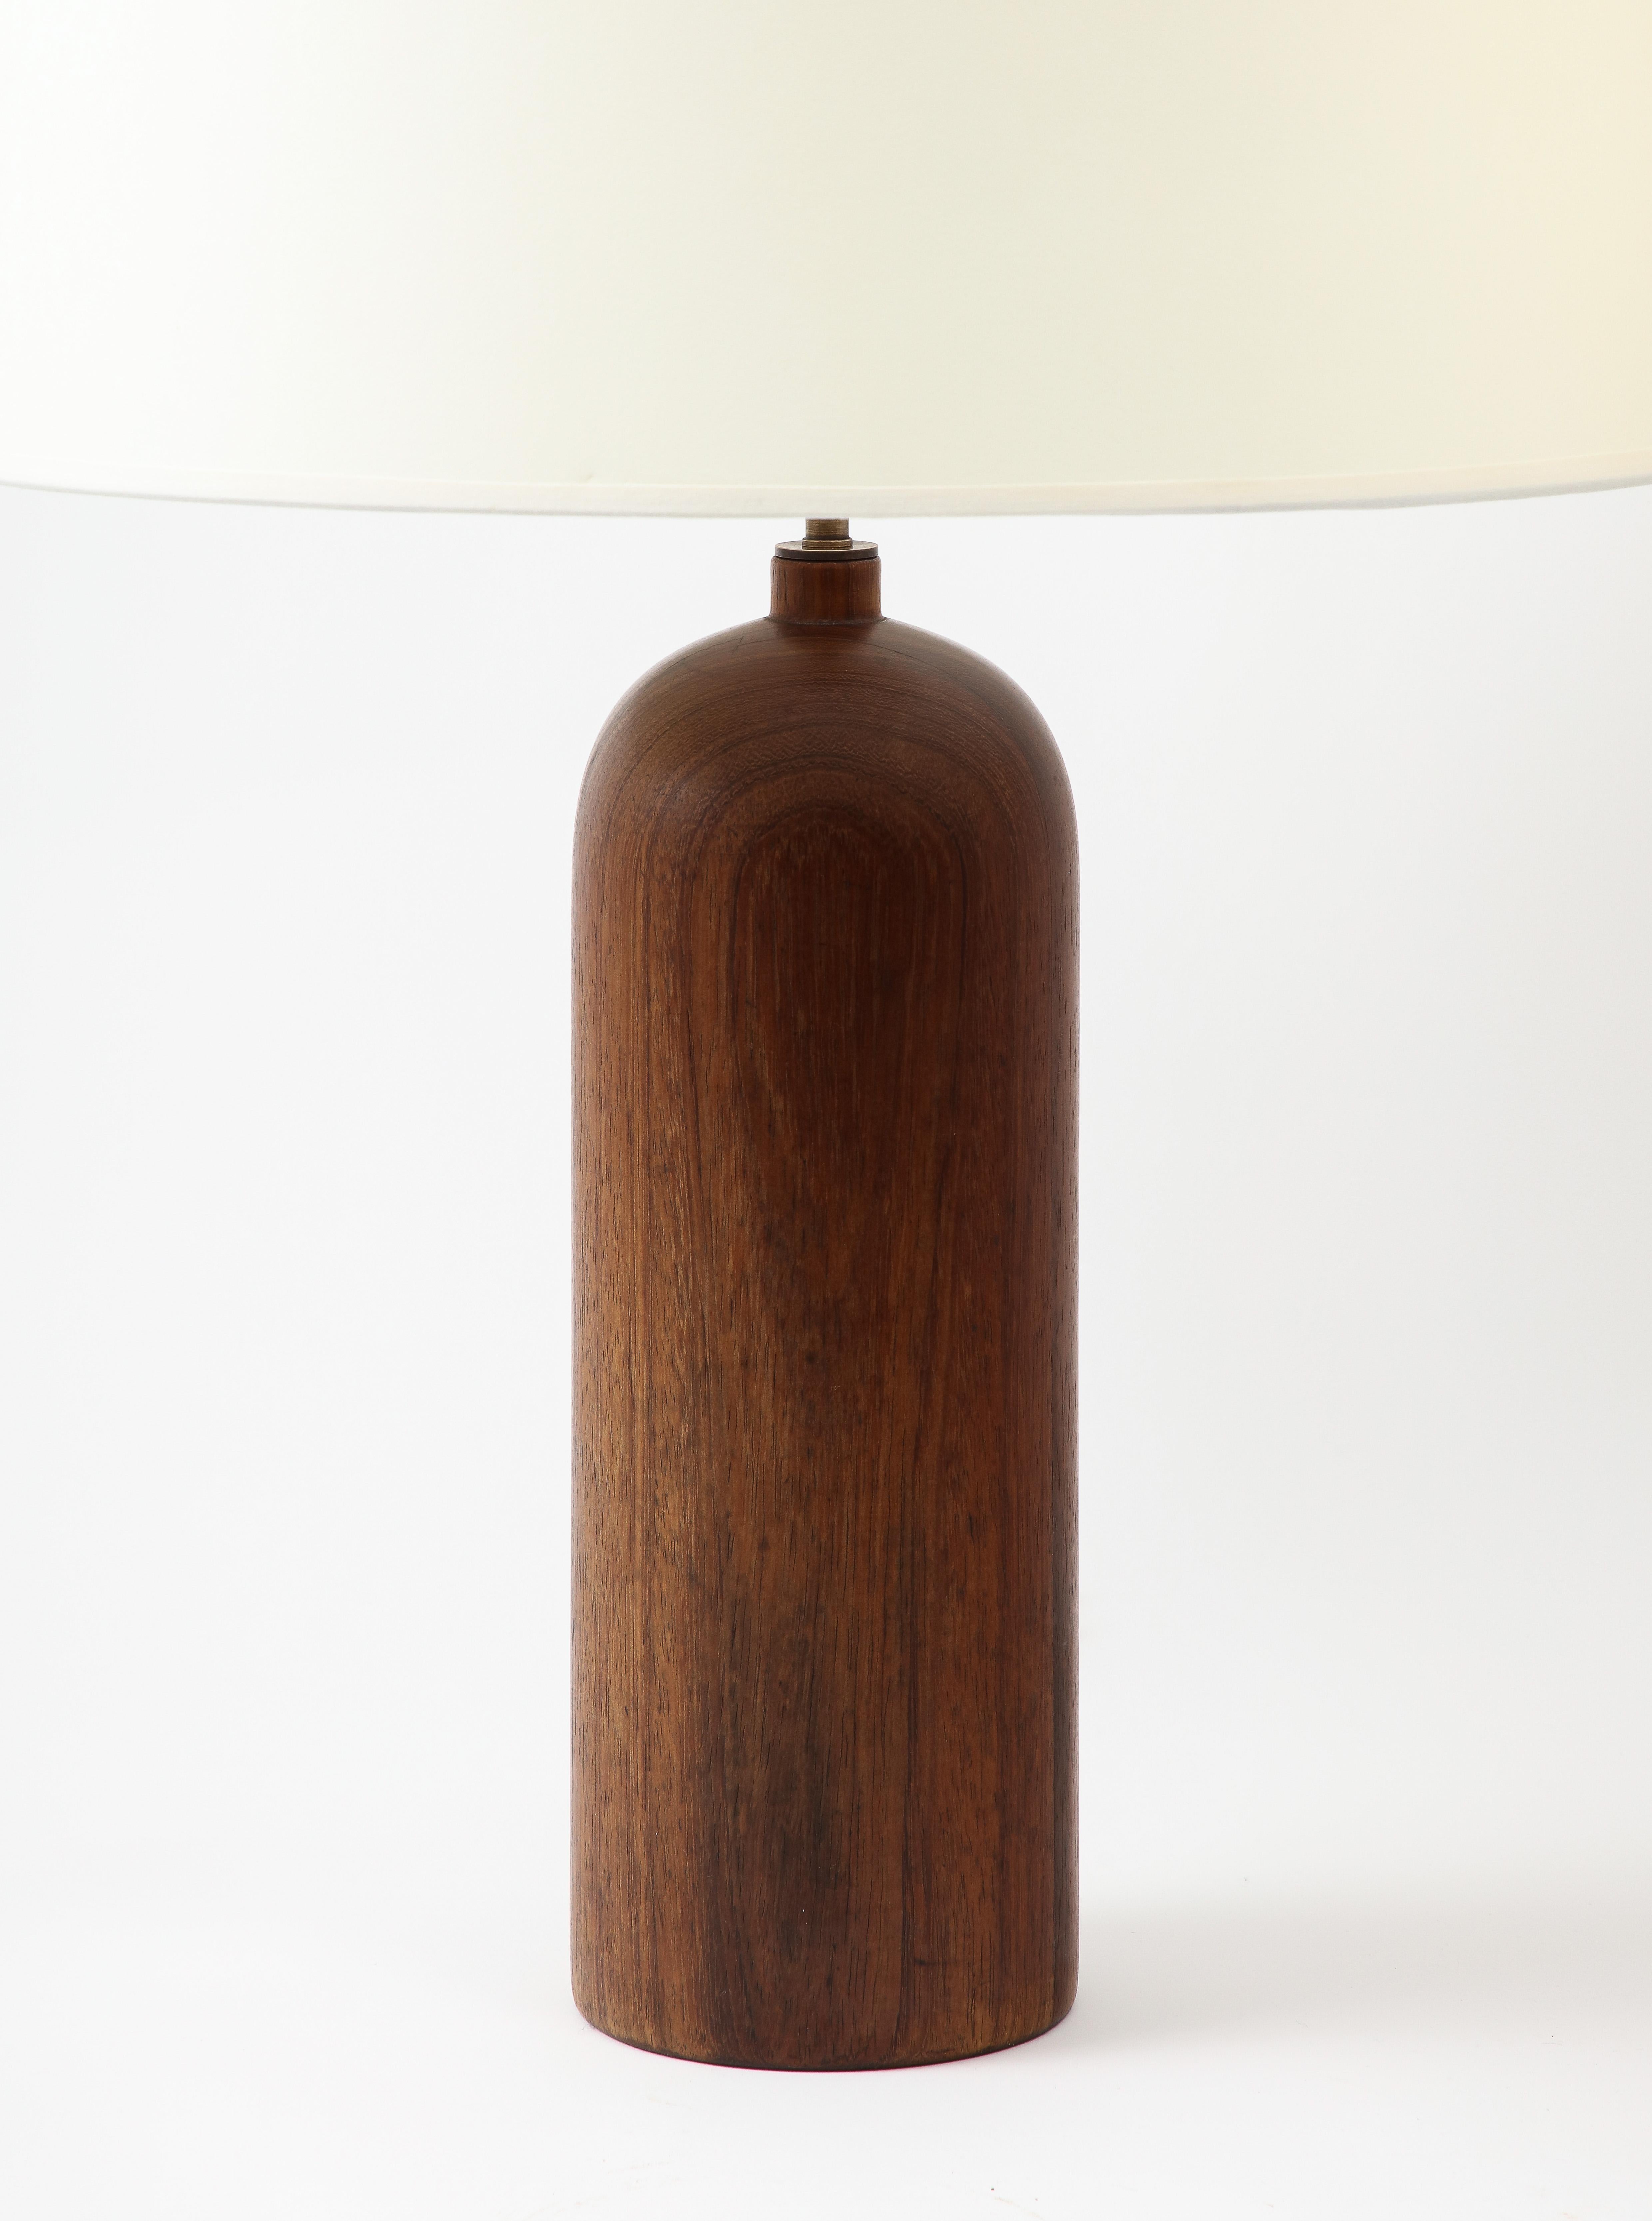 American Pair of Large Solid Walnut Table lamps, USA 1960's